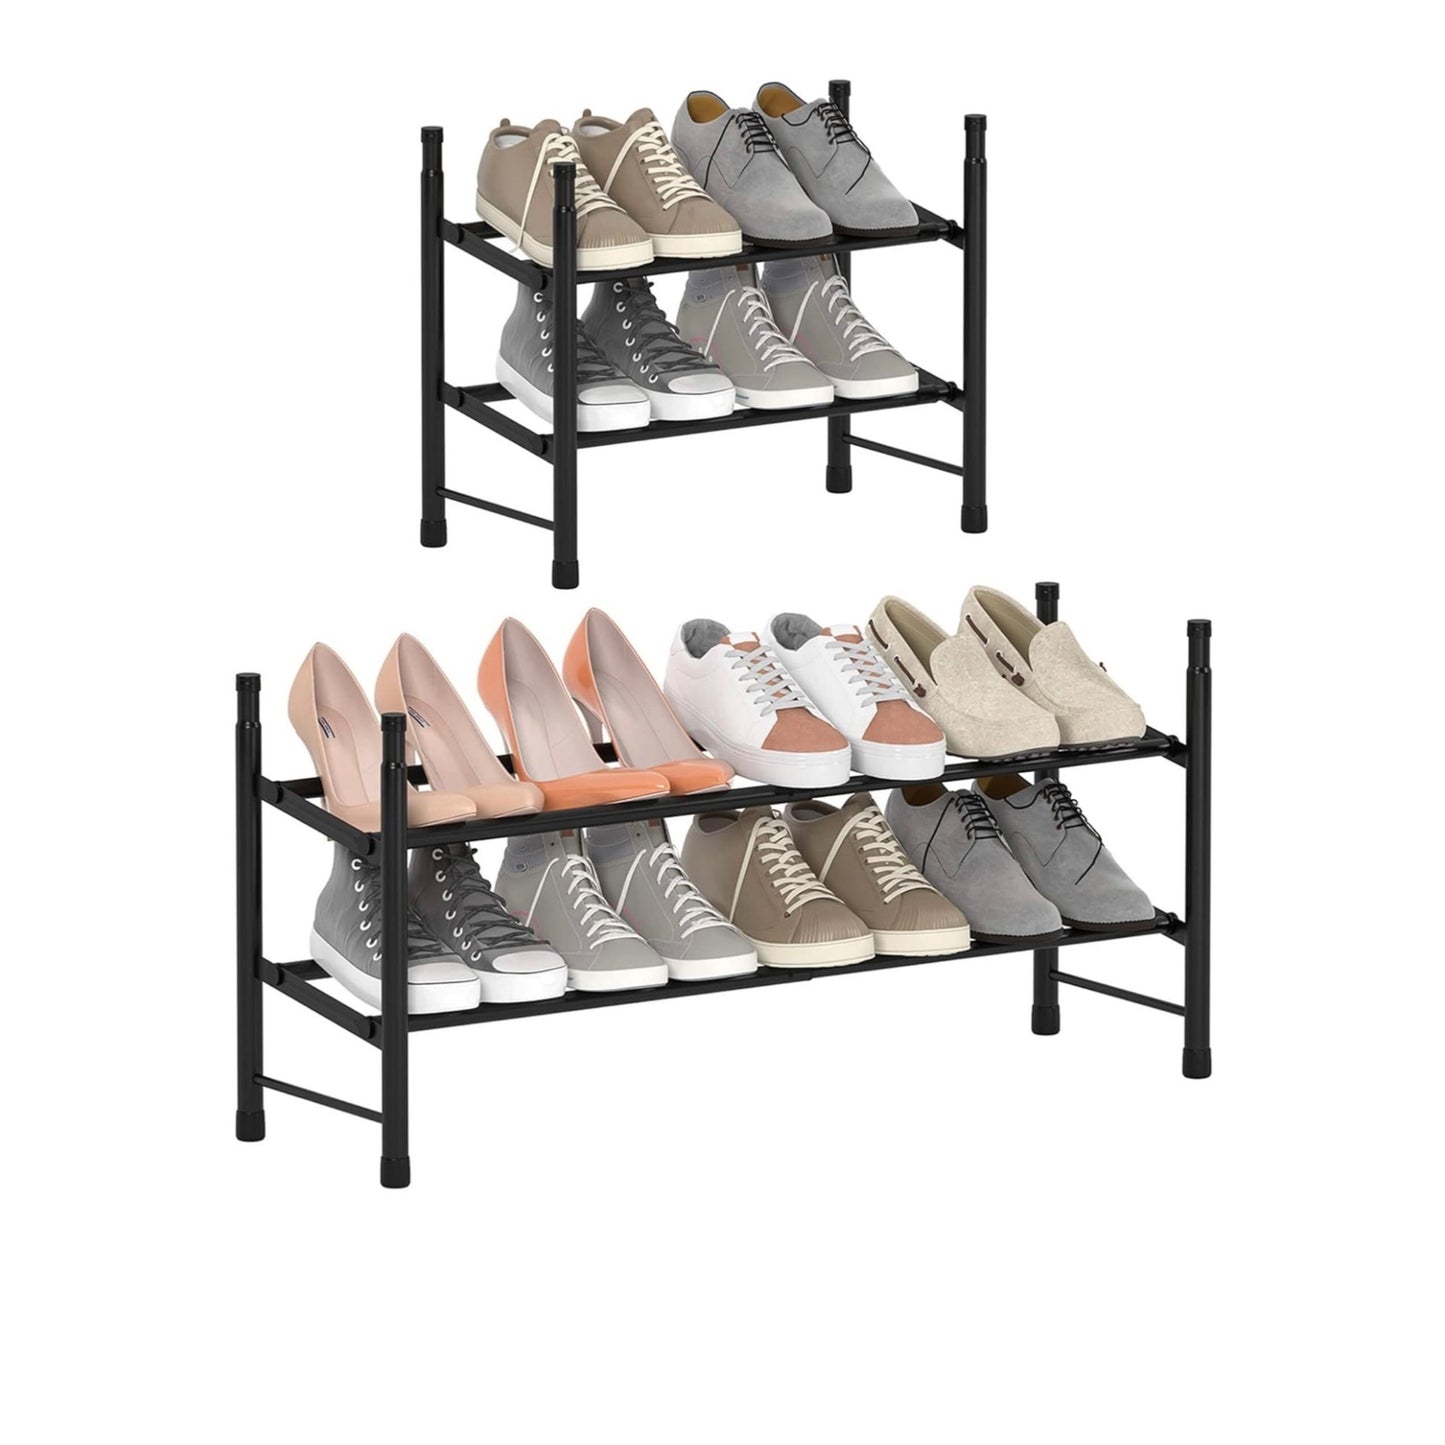 Expandable 2-Tier Free standing shoe rack